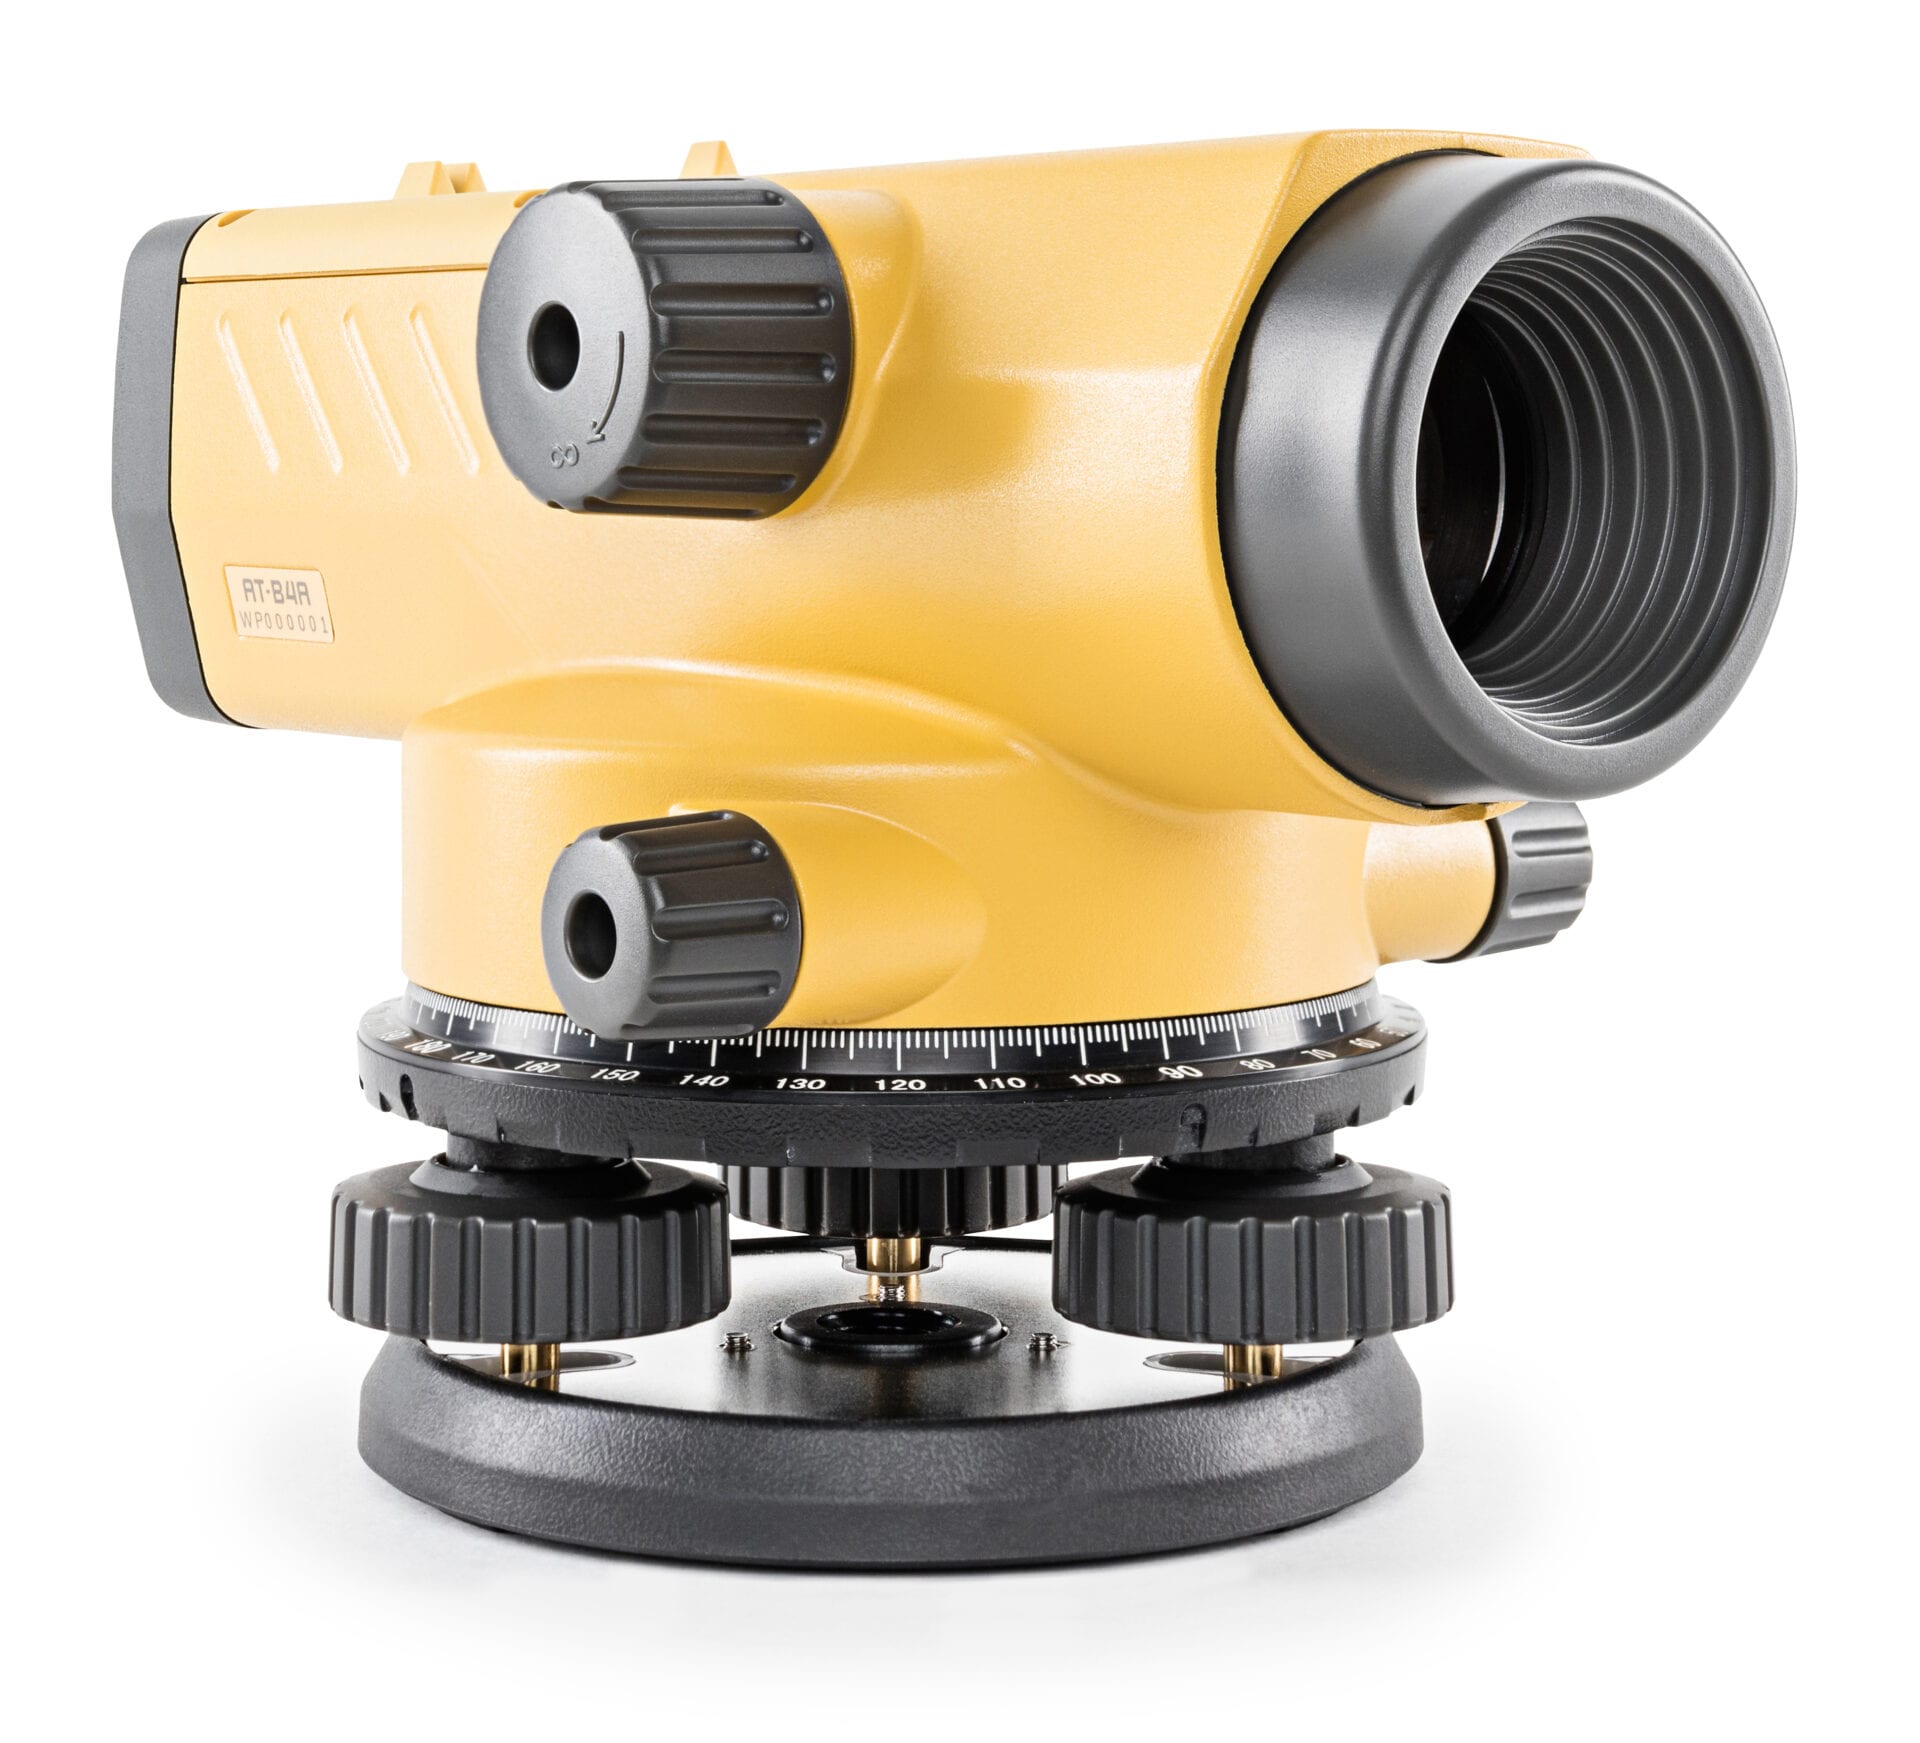 NEW TOPCON AT-B4 AUTOMATIC OPTICAL LEVEL 24 X MAGNIFICATION 